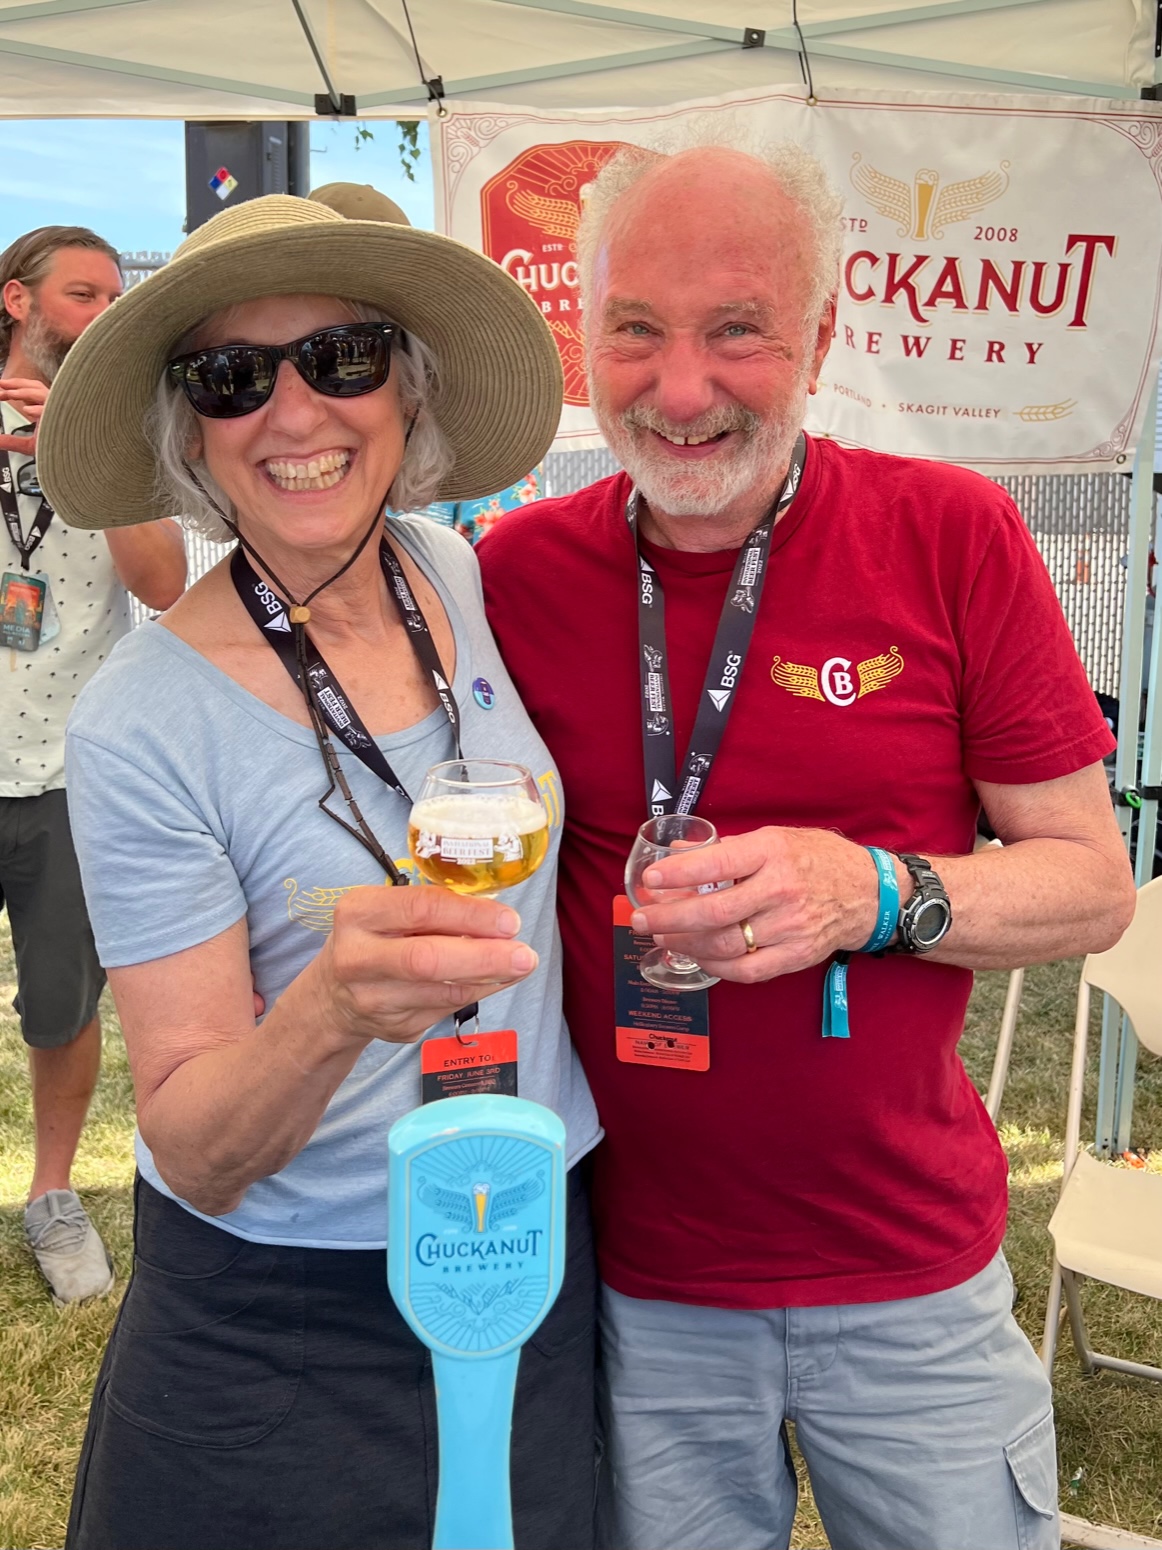 Mari and Will Kemper from Chuckanut Brewery enjoyed serving its beers at the 2022 Firestone Walker Invitational Beer Fest.